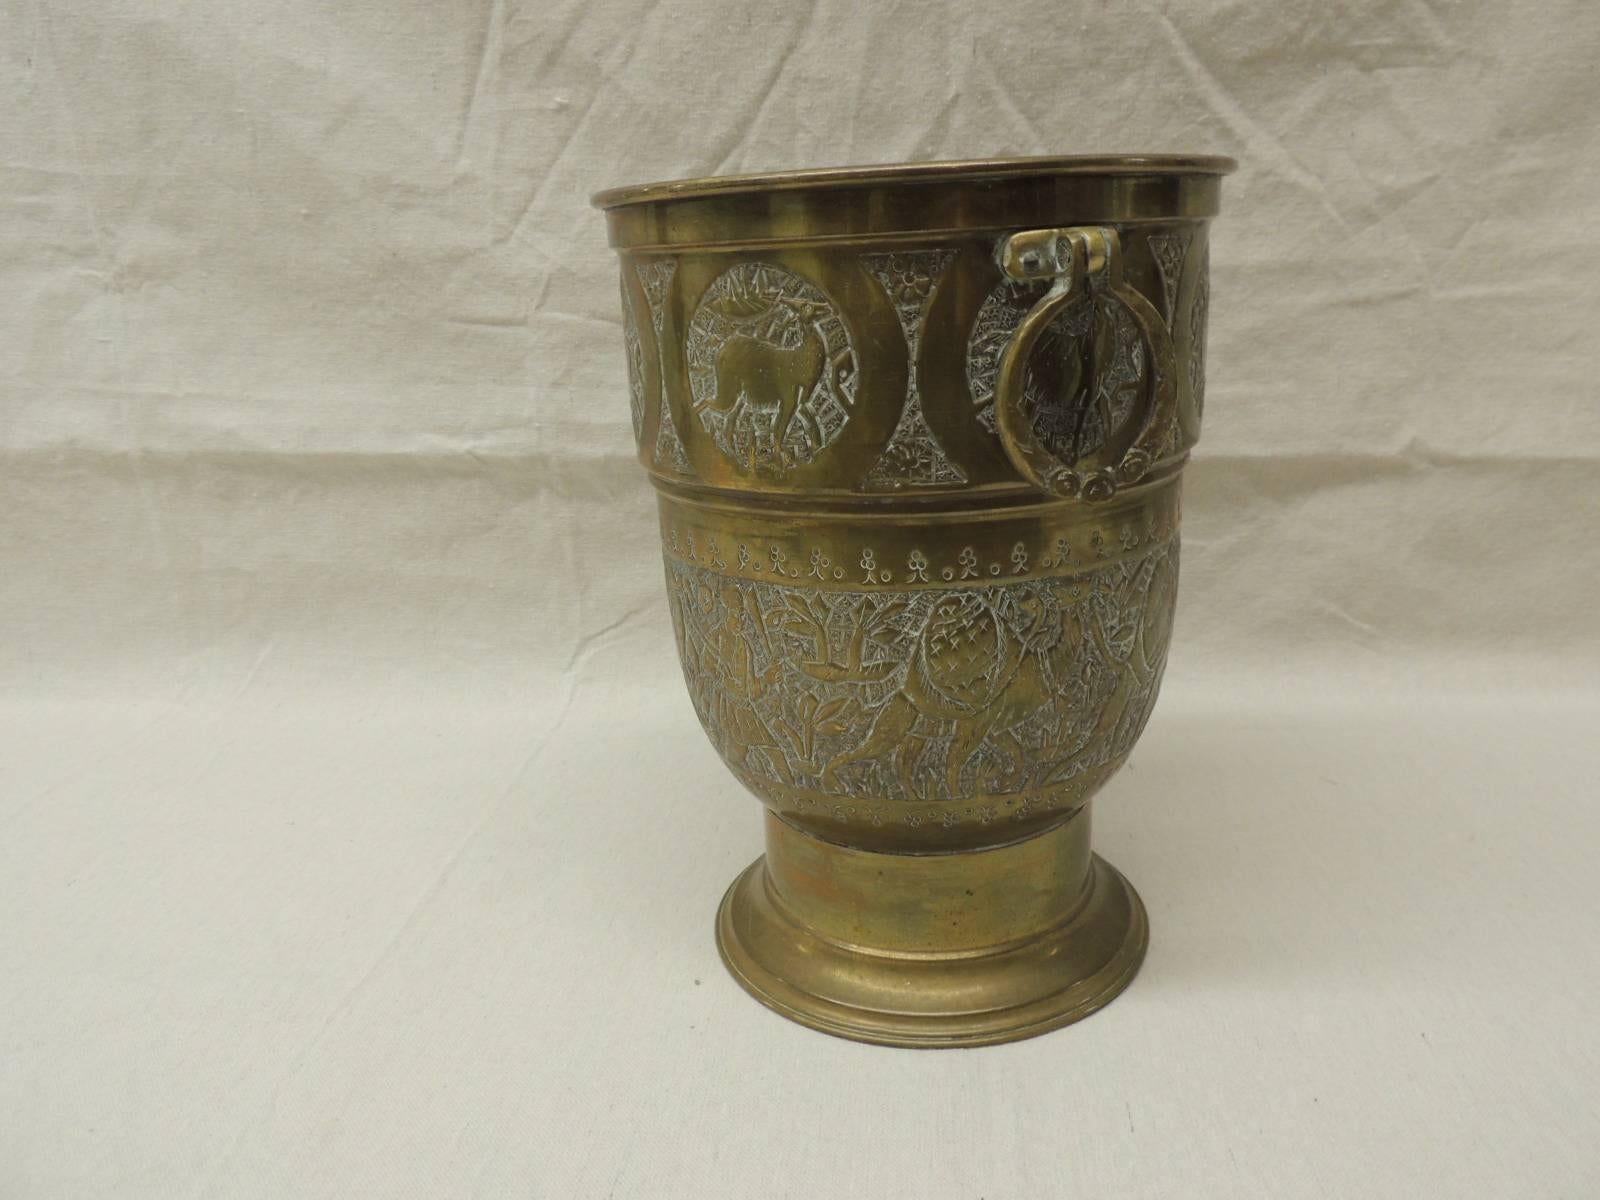 Persian brass ice bucket with handles, depicting deer and a caravan of camels all around. Round handles and aluminum bucket liner.